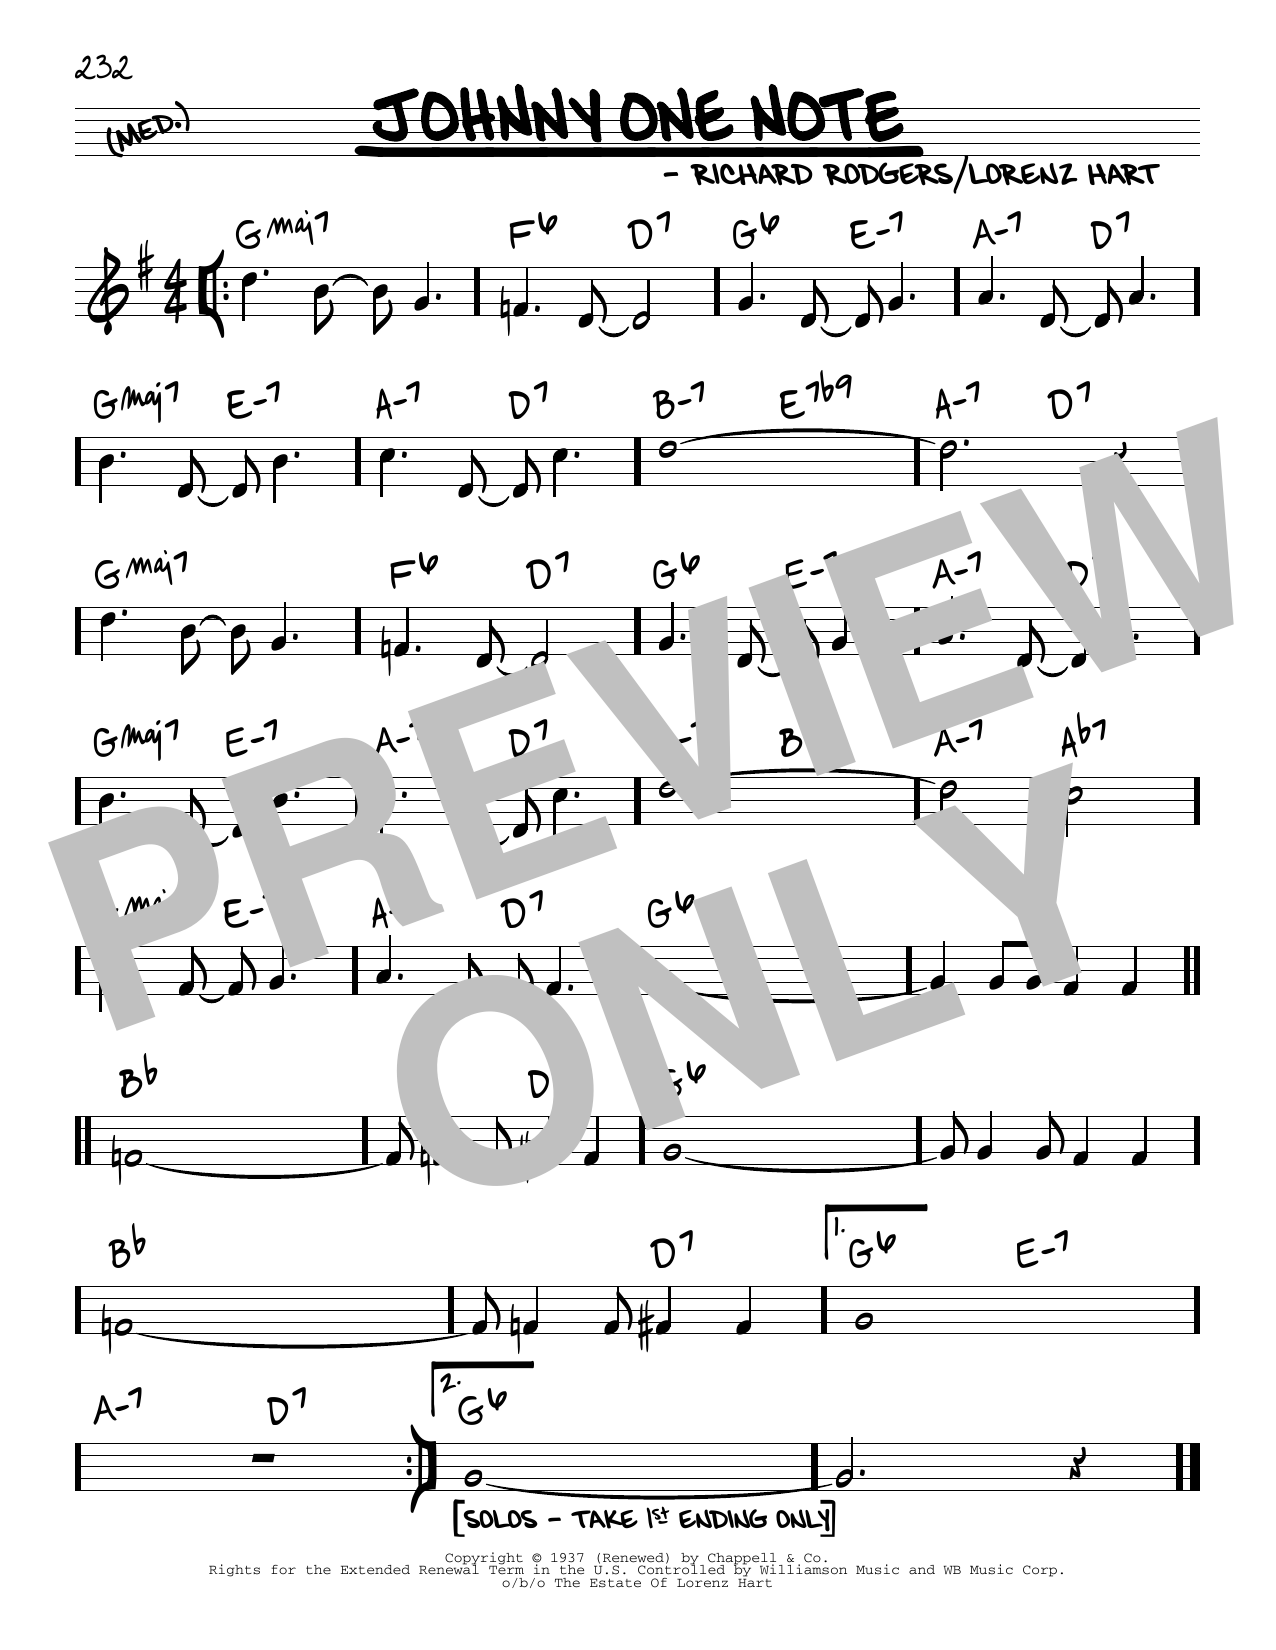 Download Rodgers & Hart Johnny One-Note Sheet Music